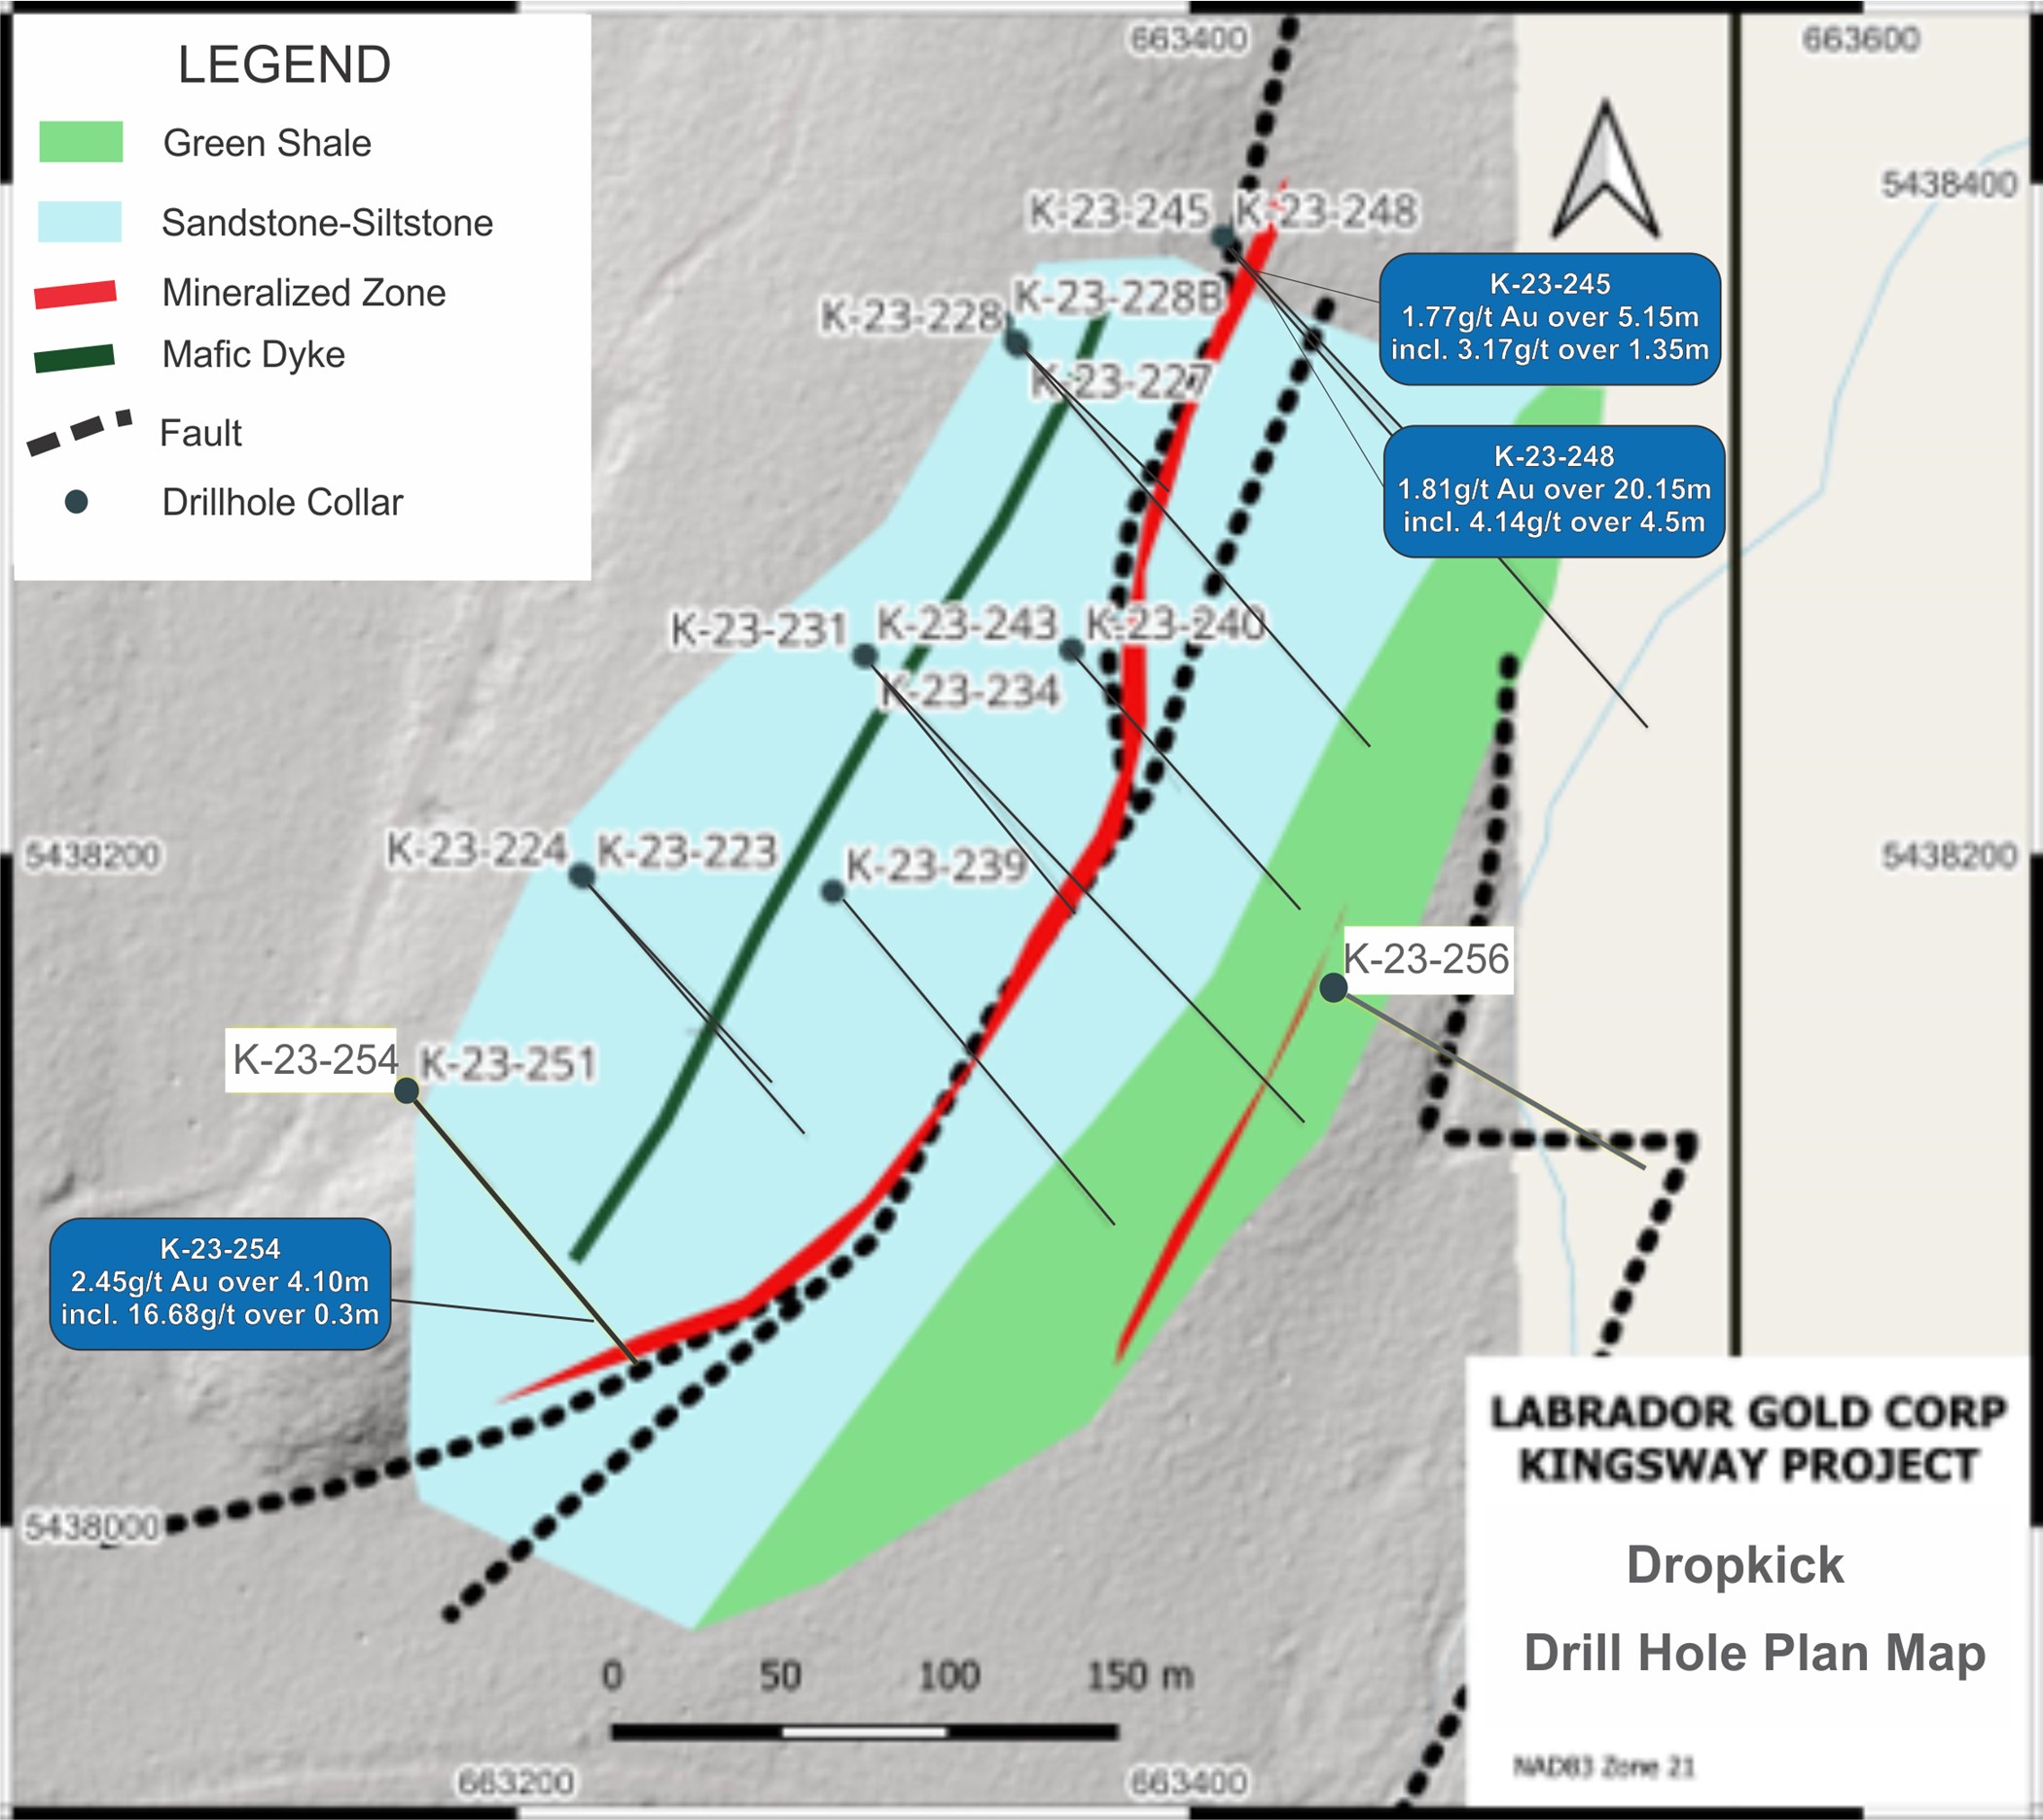 Plan map of Dropkick drill holes showing highlights of latest results.